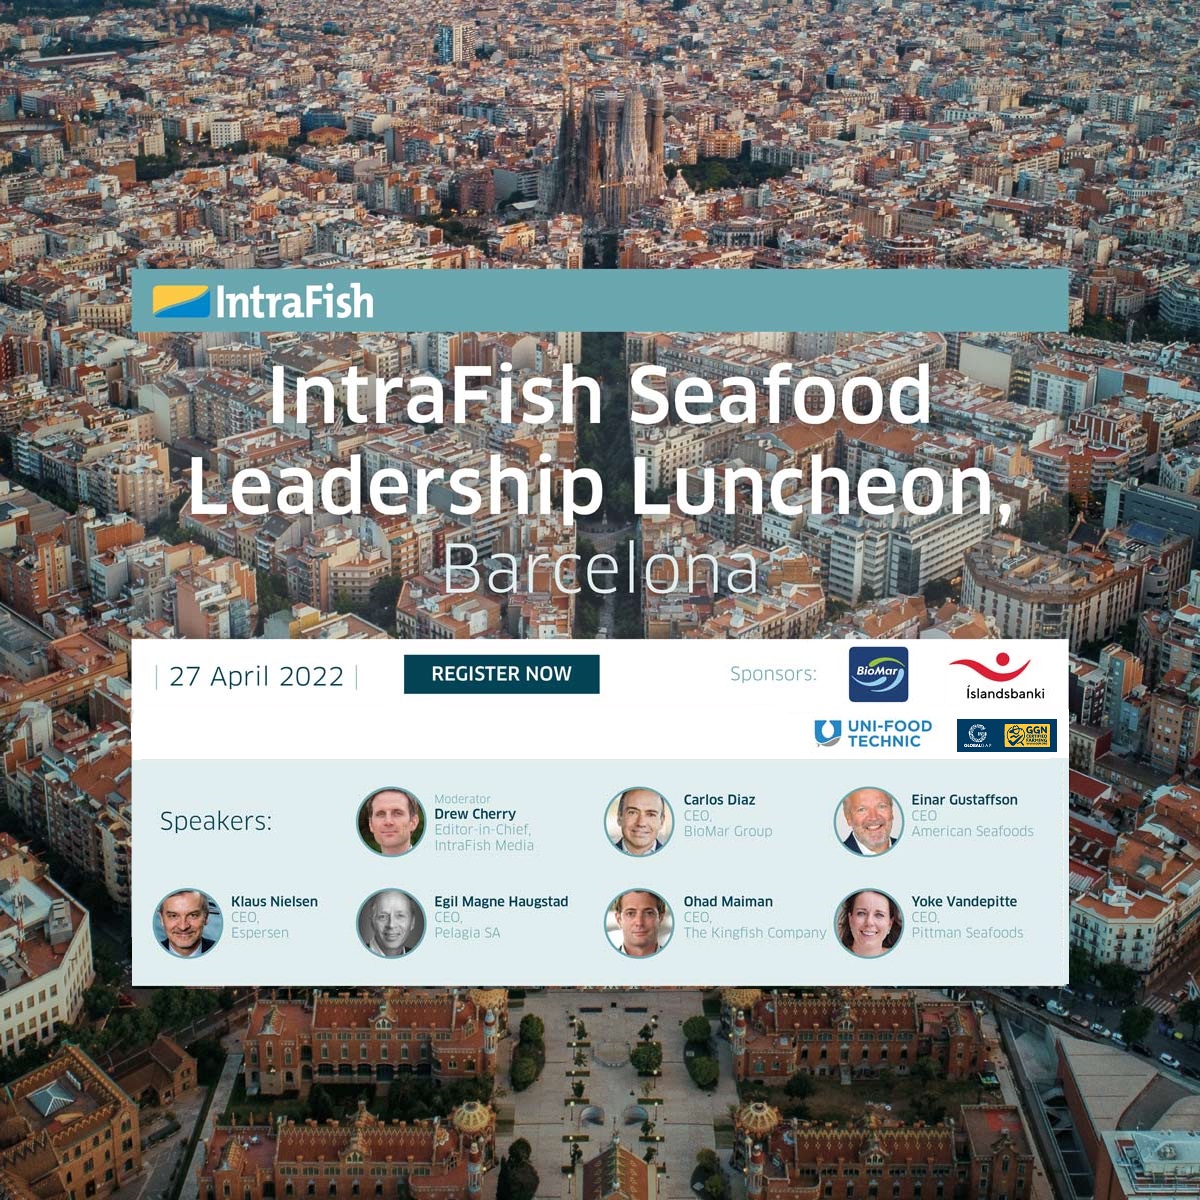 24 Hours to Go

It's your last chance to be among 100 top-tier seafood executives at this years Leadership Luncheon. Join IntraFish for key informative discussions and networking opportunities at our forum taking place opposite the Expo.

https://t.co/Fb8a3nJlx1 https://t.co/NkKn8ThKqU